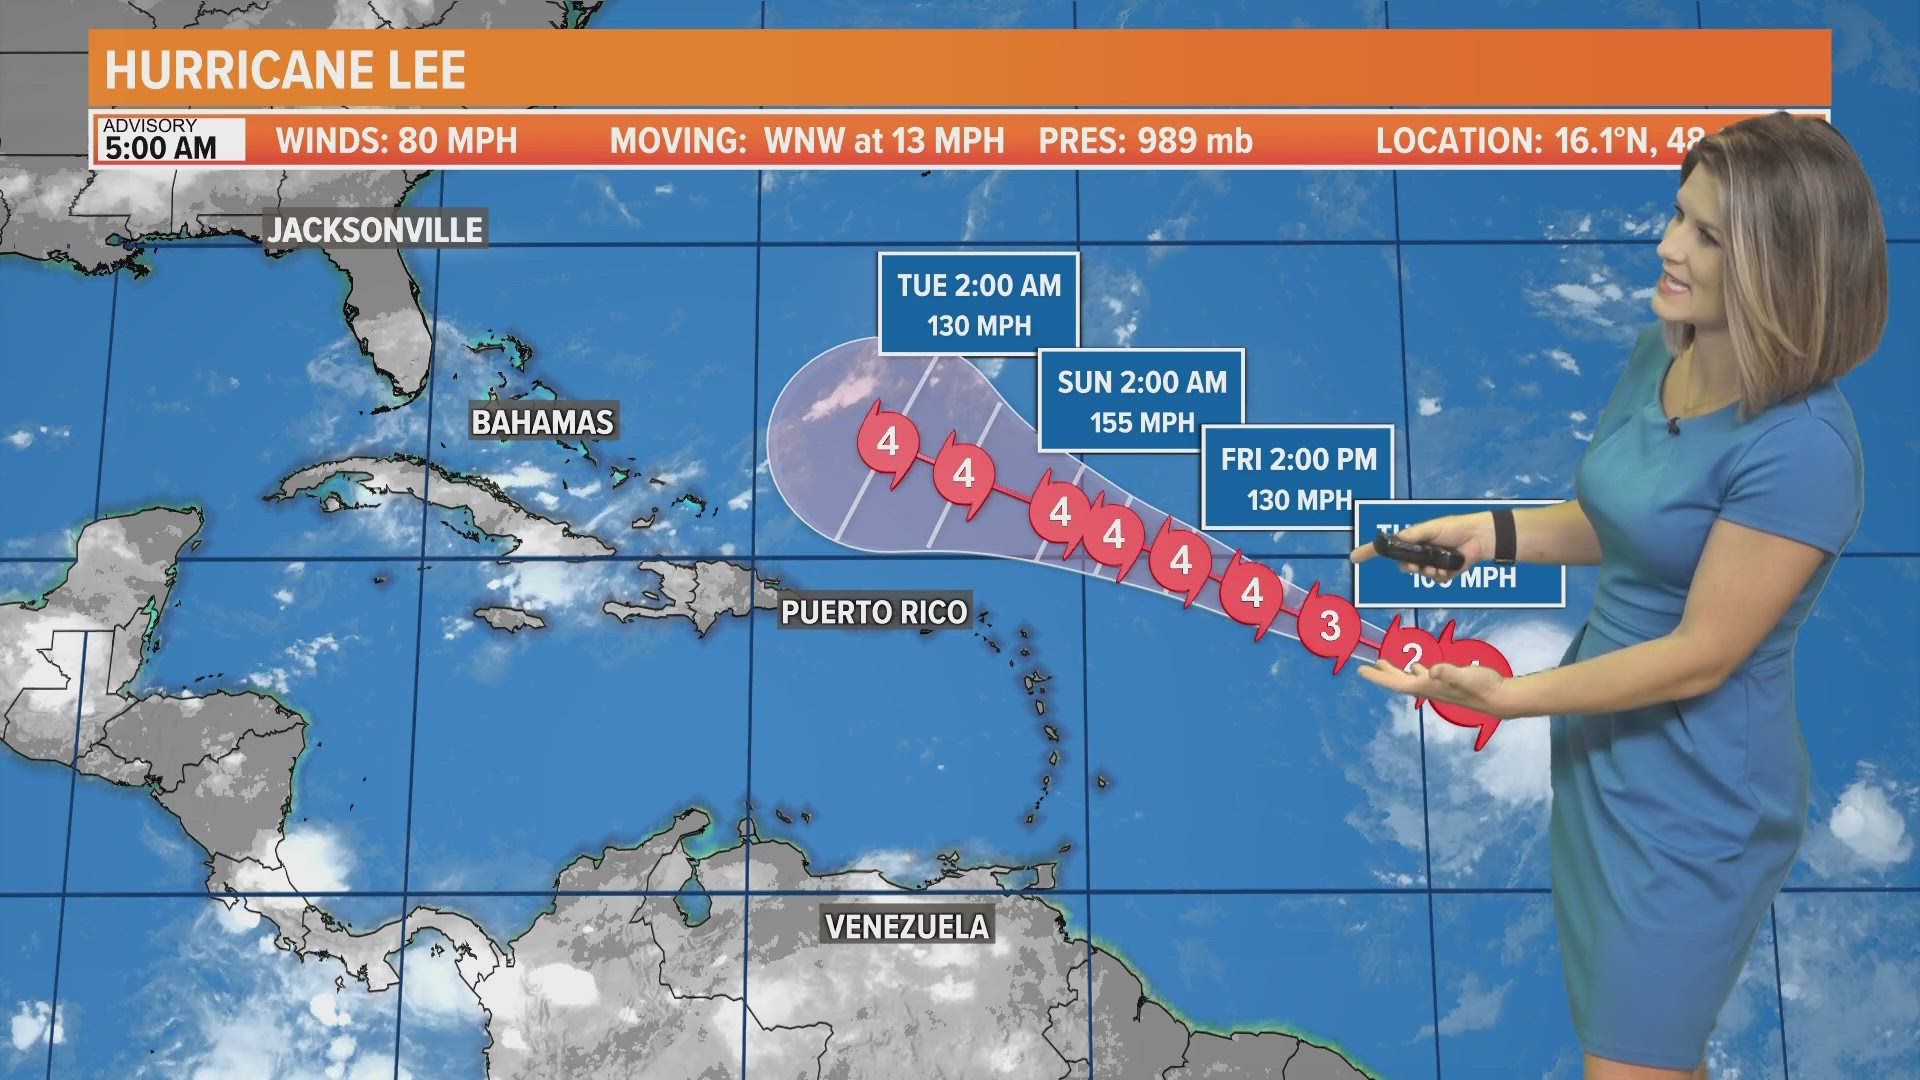 Hurricane Lee is expected to stay off the First Coast by 400+ miles by mid-week, next week.